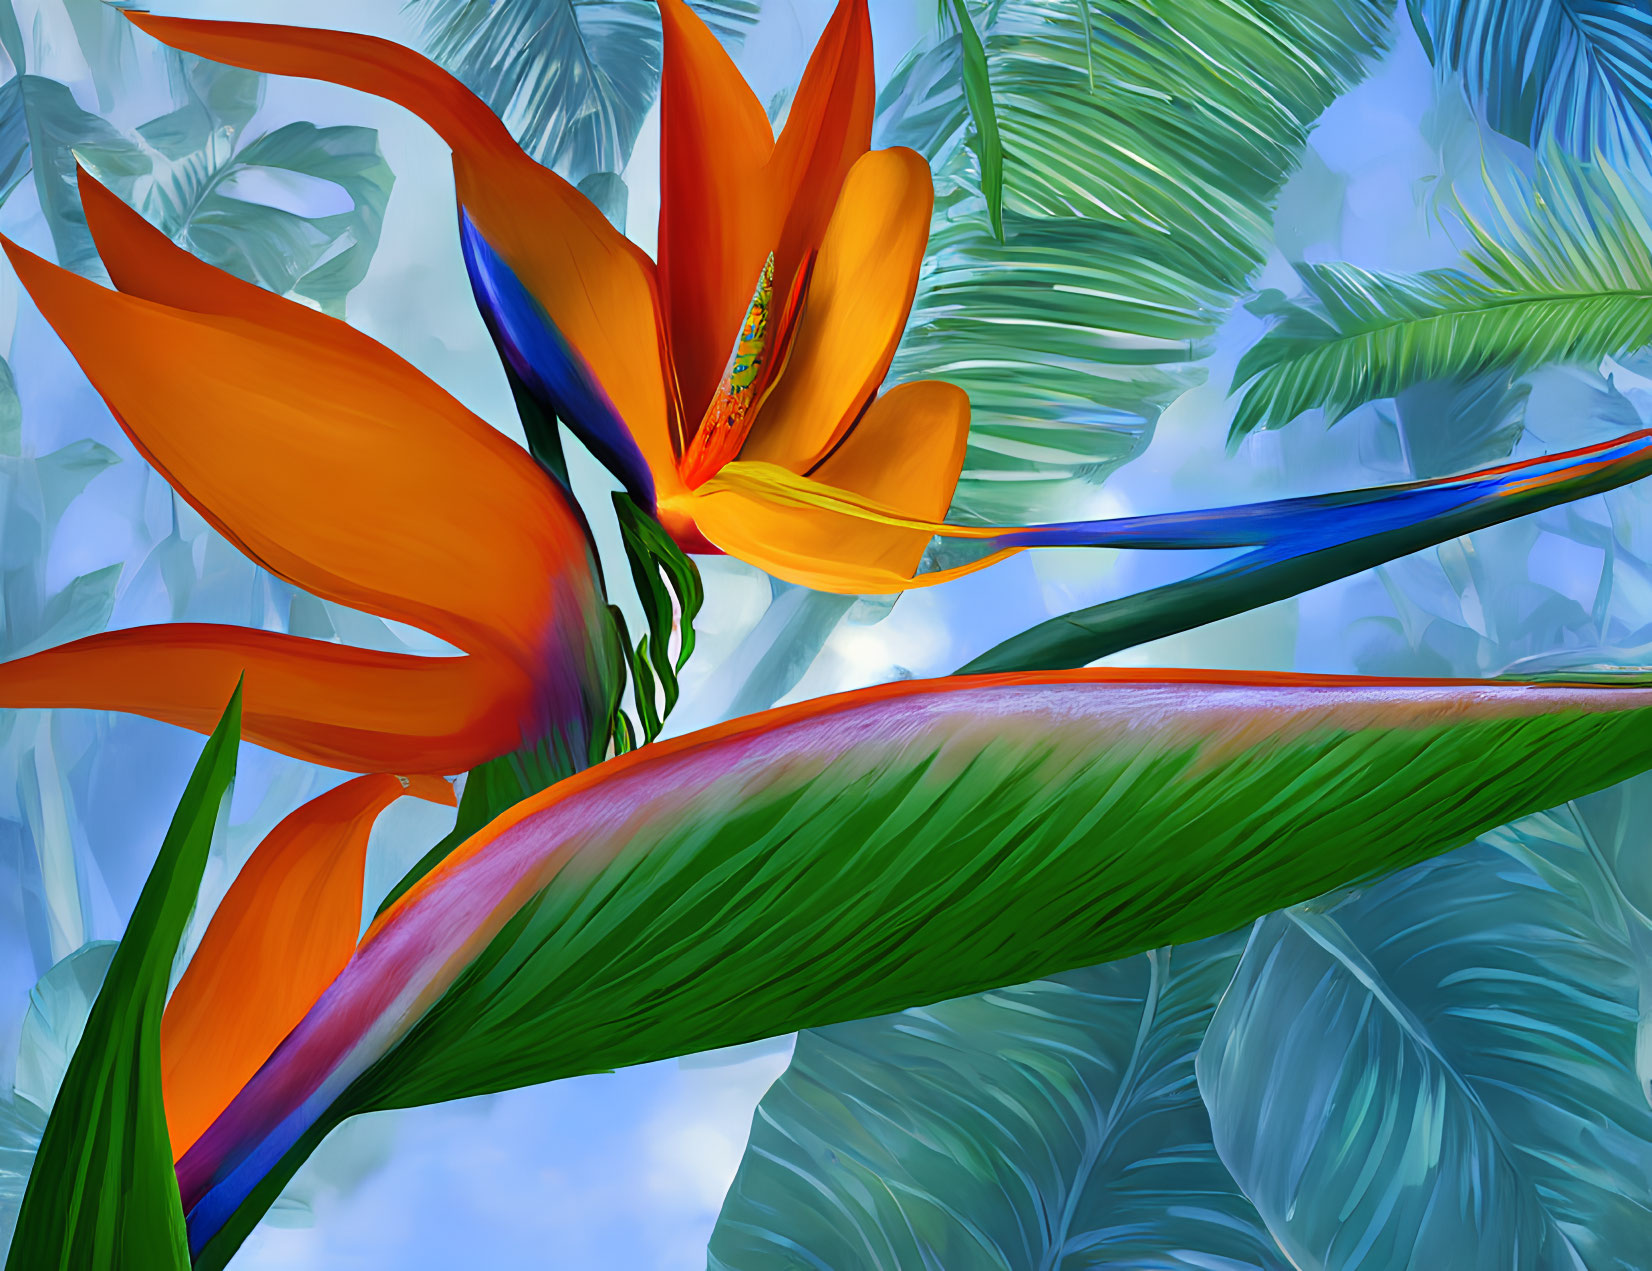 Colorful Digital Art: Orange Bird of Paradise Flower on Blue and Green Tropical Background